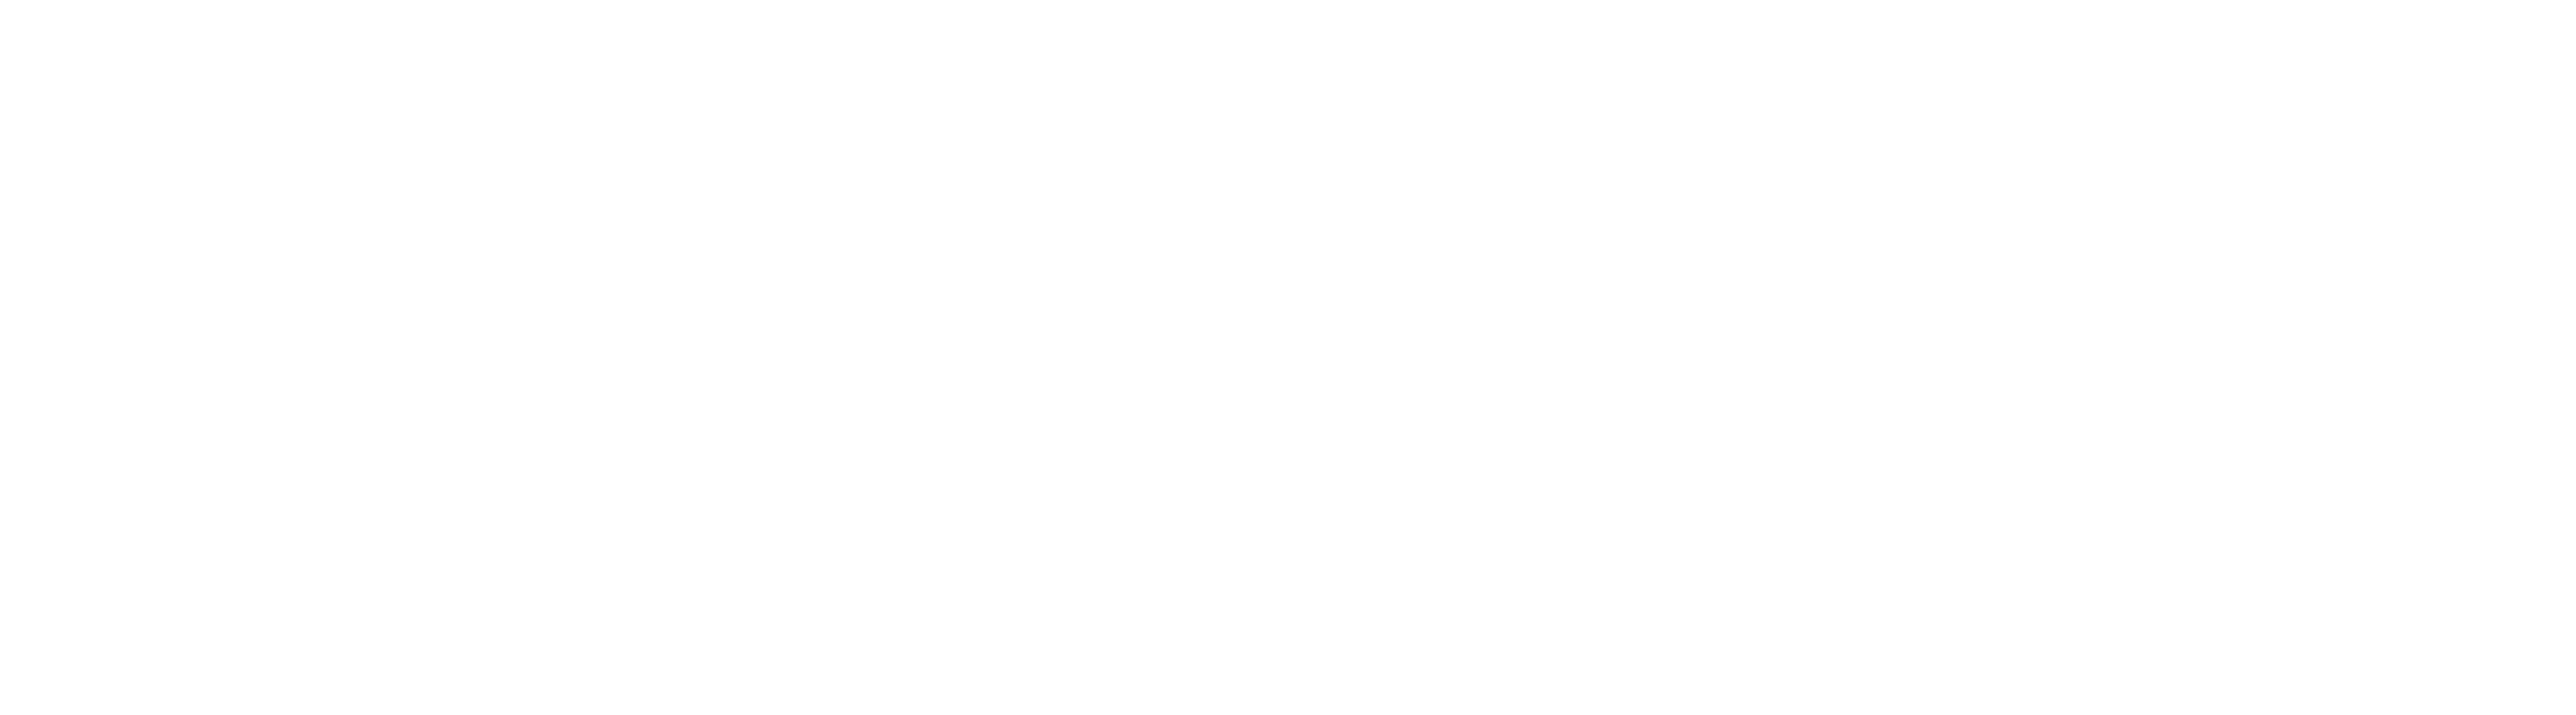 Happiness Counts